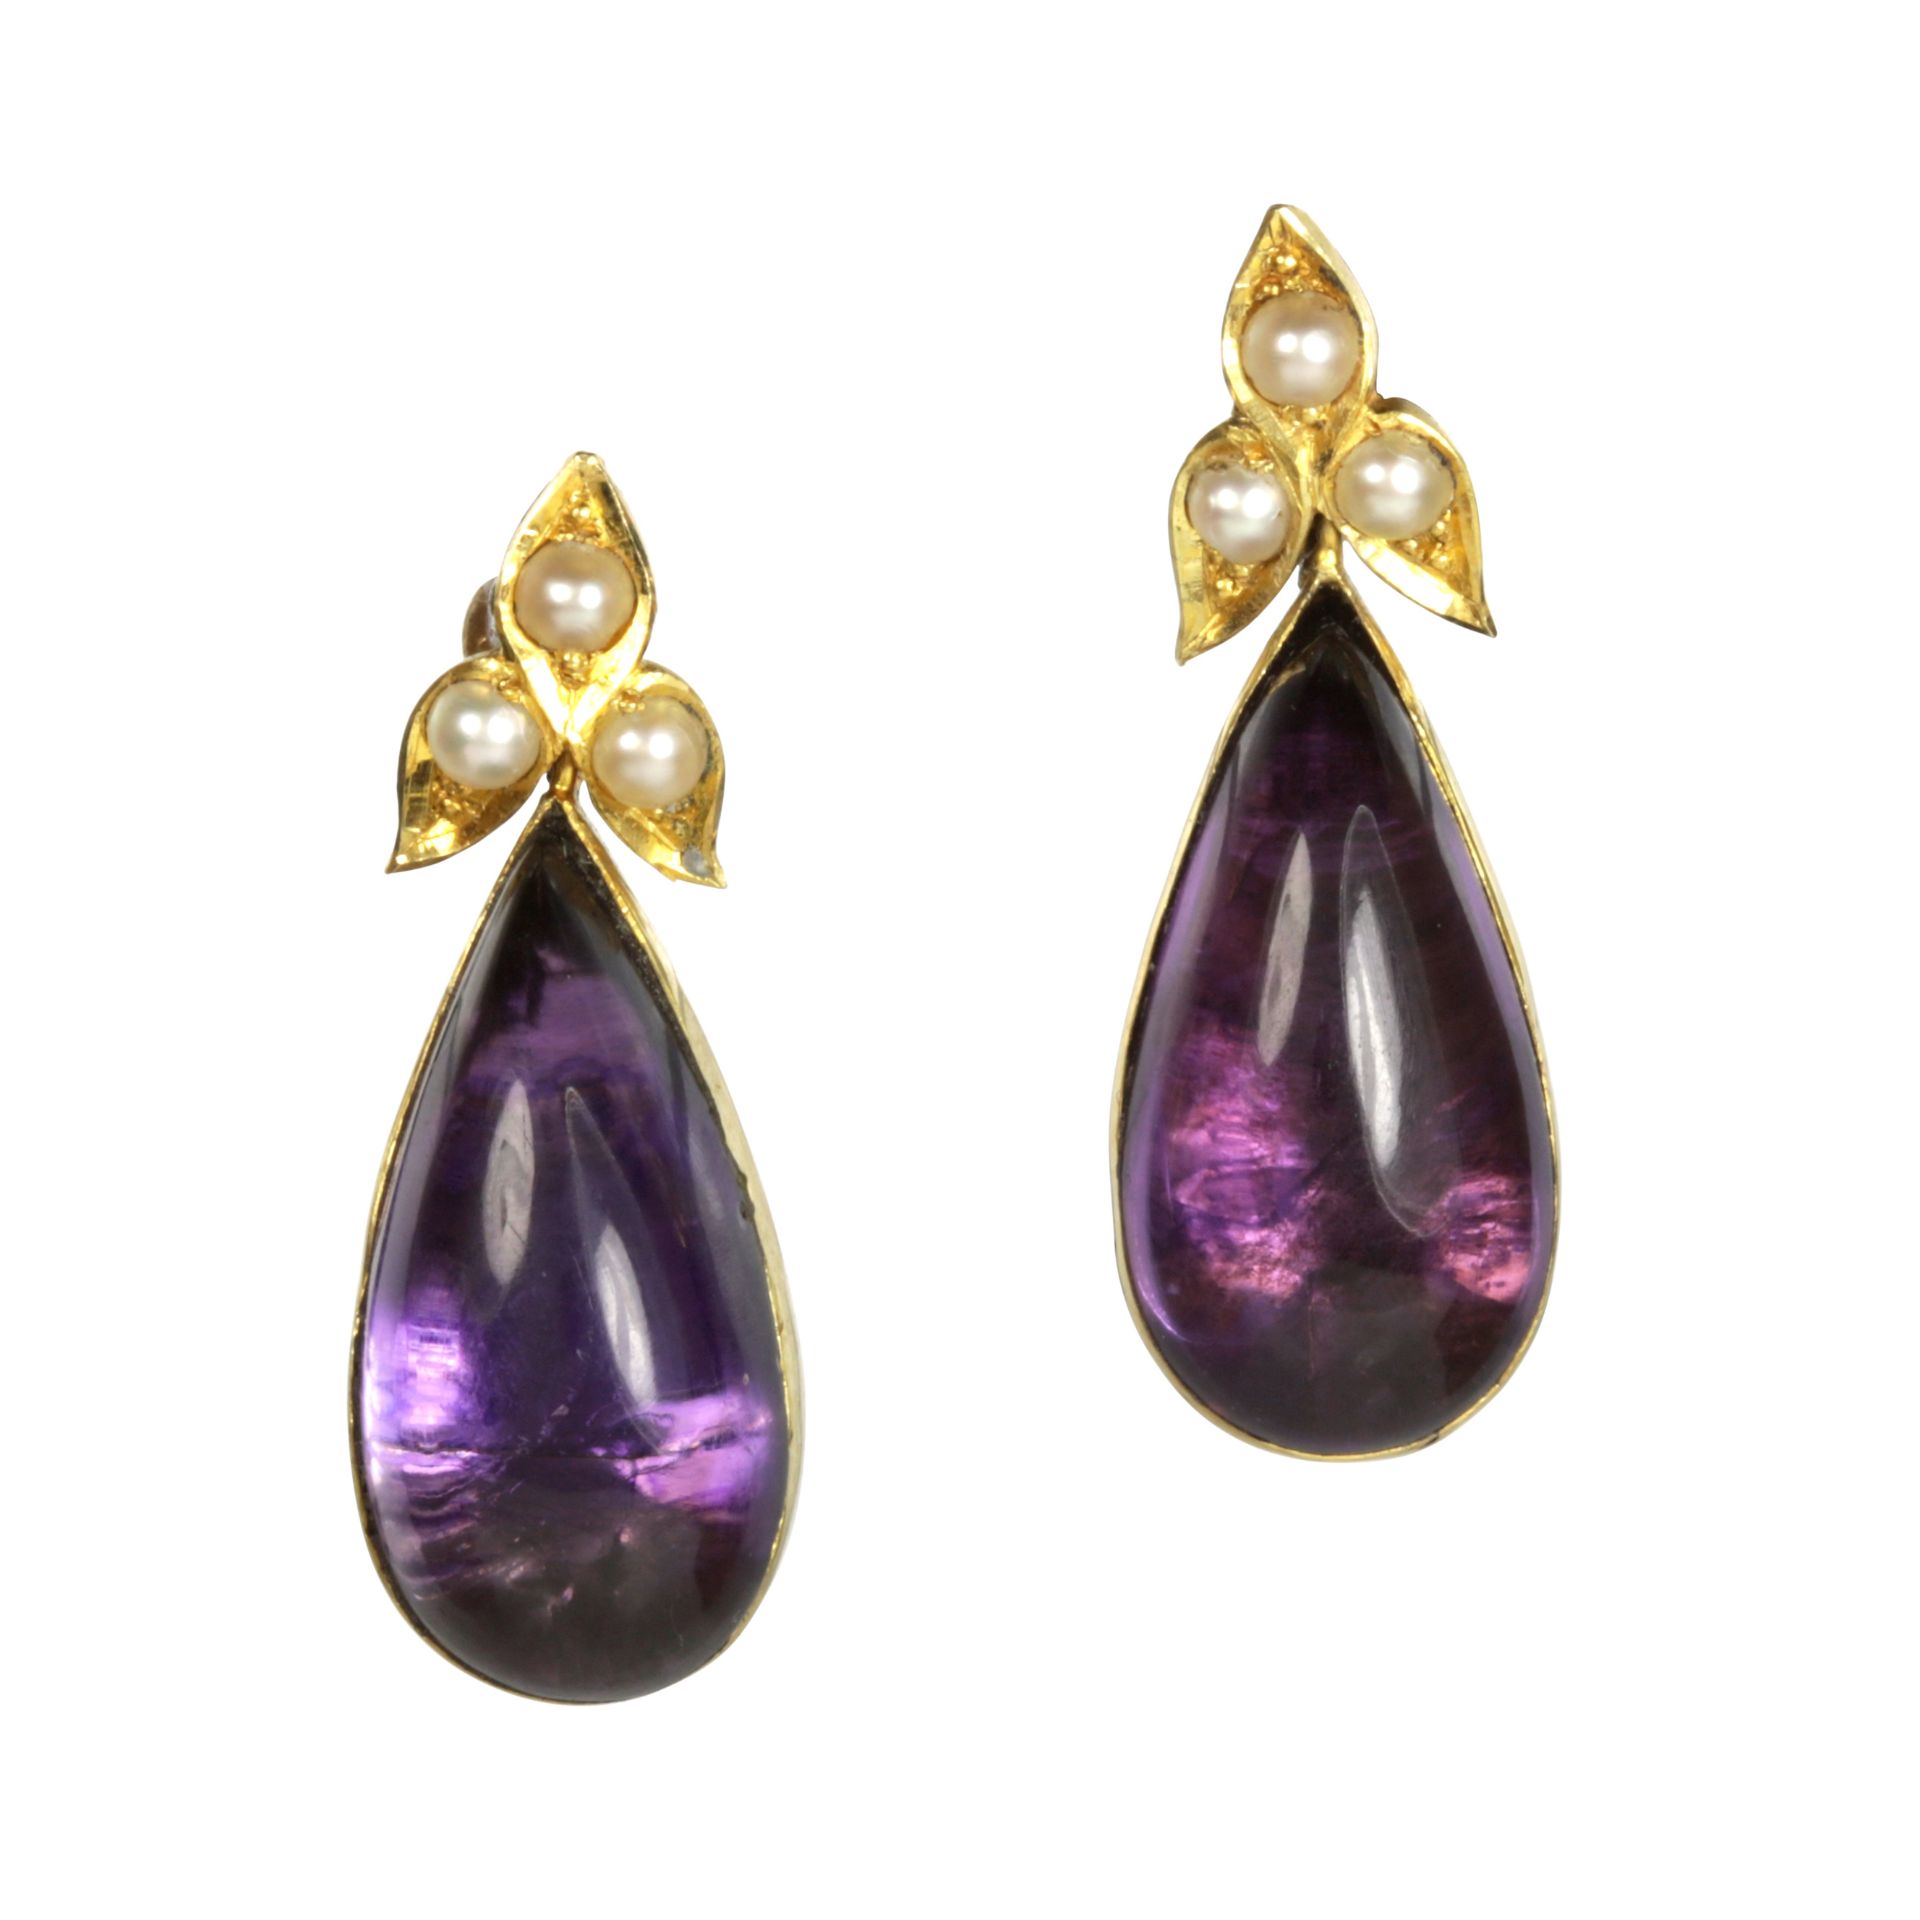 A PAIR OF AMETHYST AND PEARL DROP EARRINGS in yellow gold, each set with a teardrop cabochon